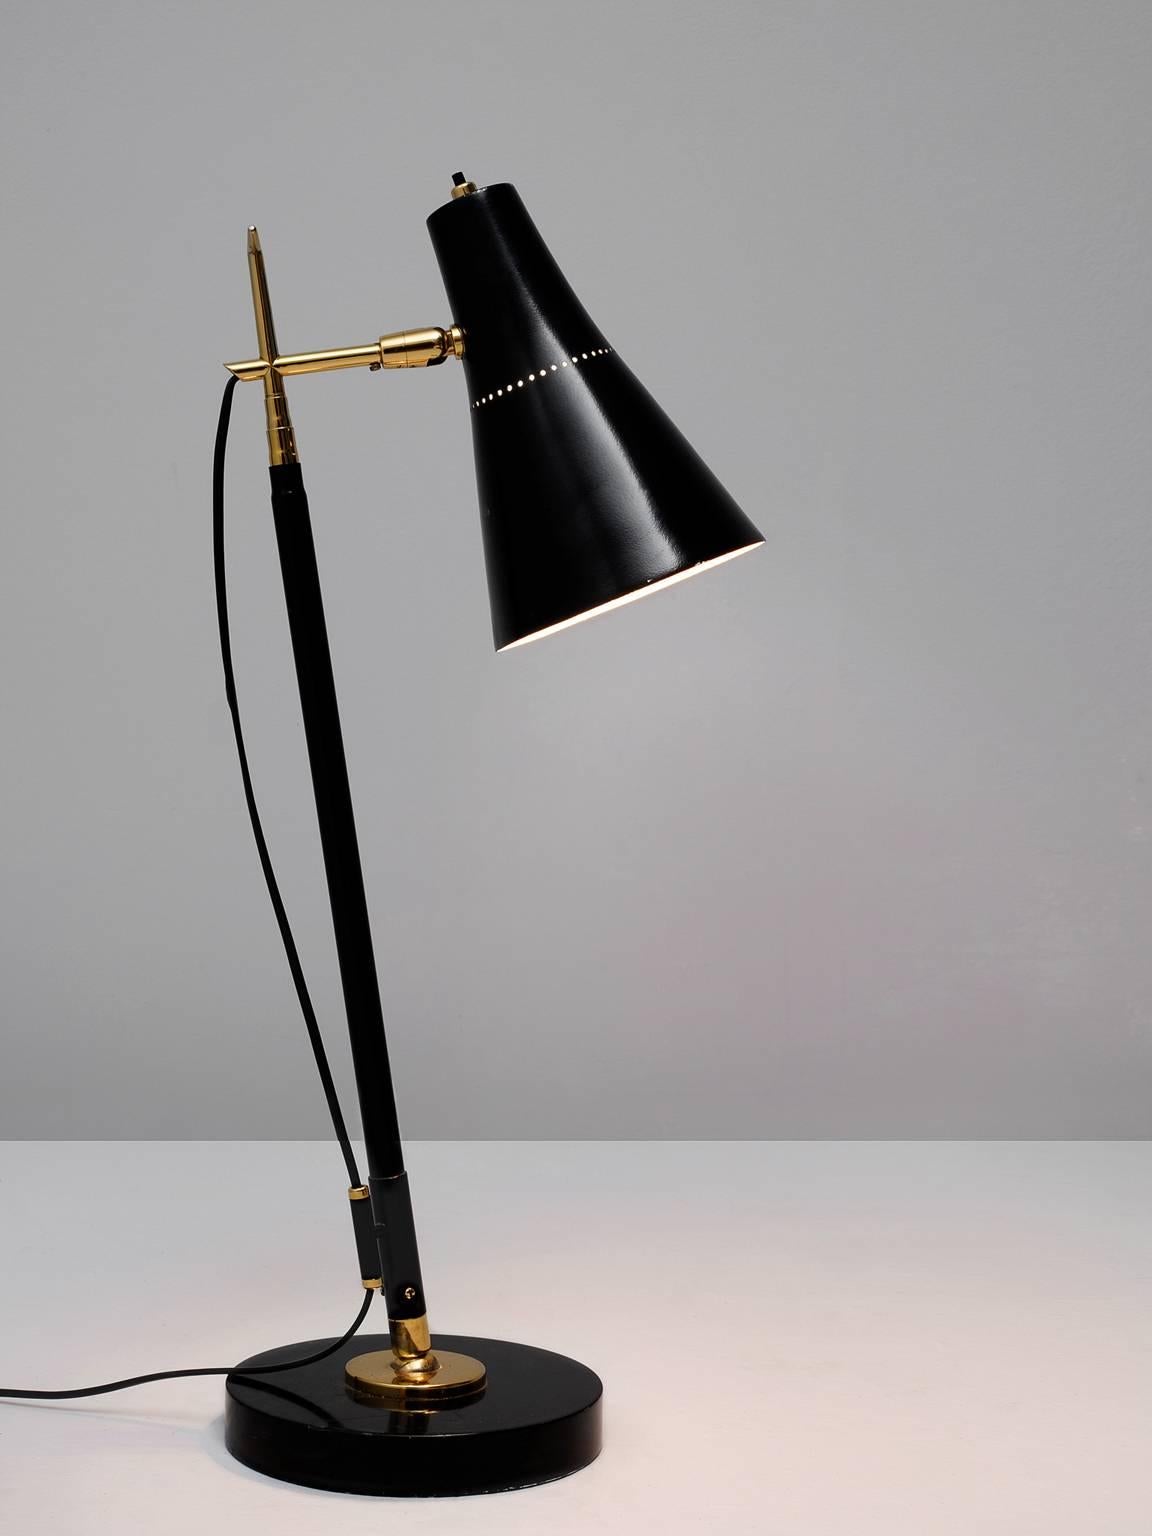 Adjustable floor lamp model 201 in metal, stone and brass, by Giuseppe Ostuni for O-Luce, Italy, 1951.

Exceptional light, which can be used as floor and table lamp. The black coated and brass stern is adjustable in height, from a total of 56cm to